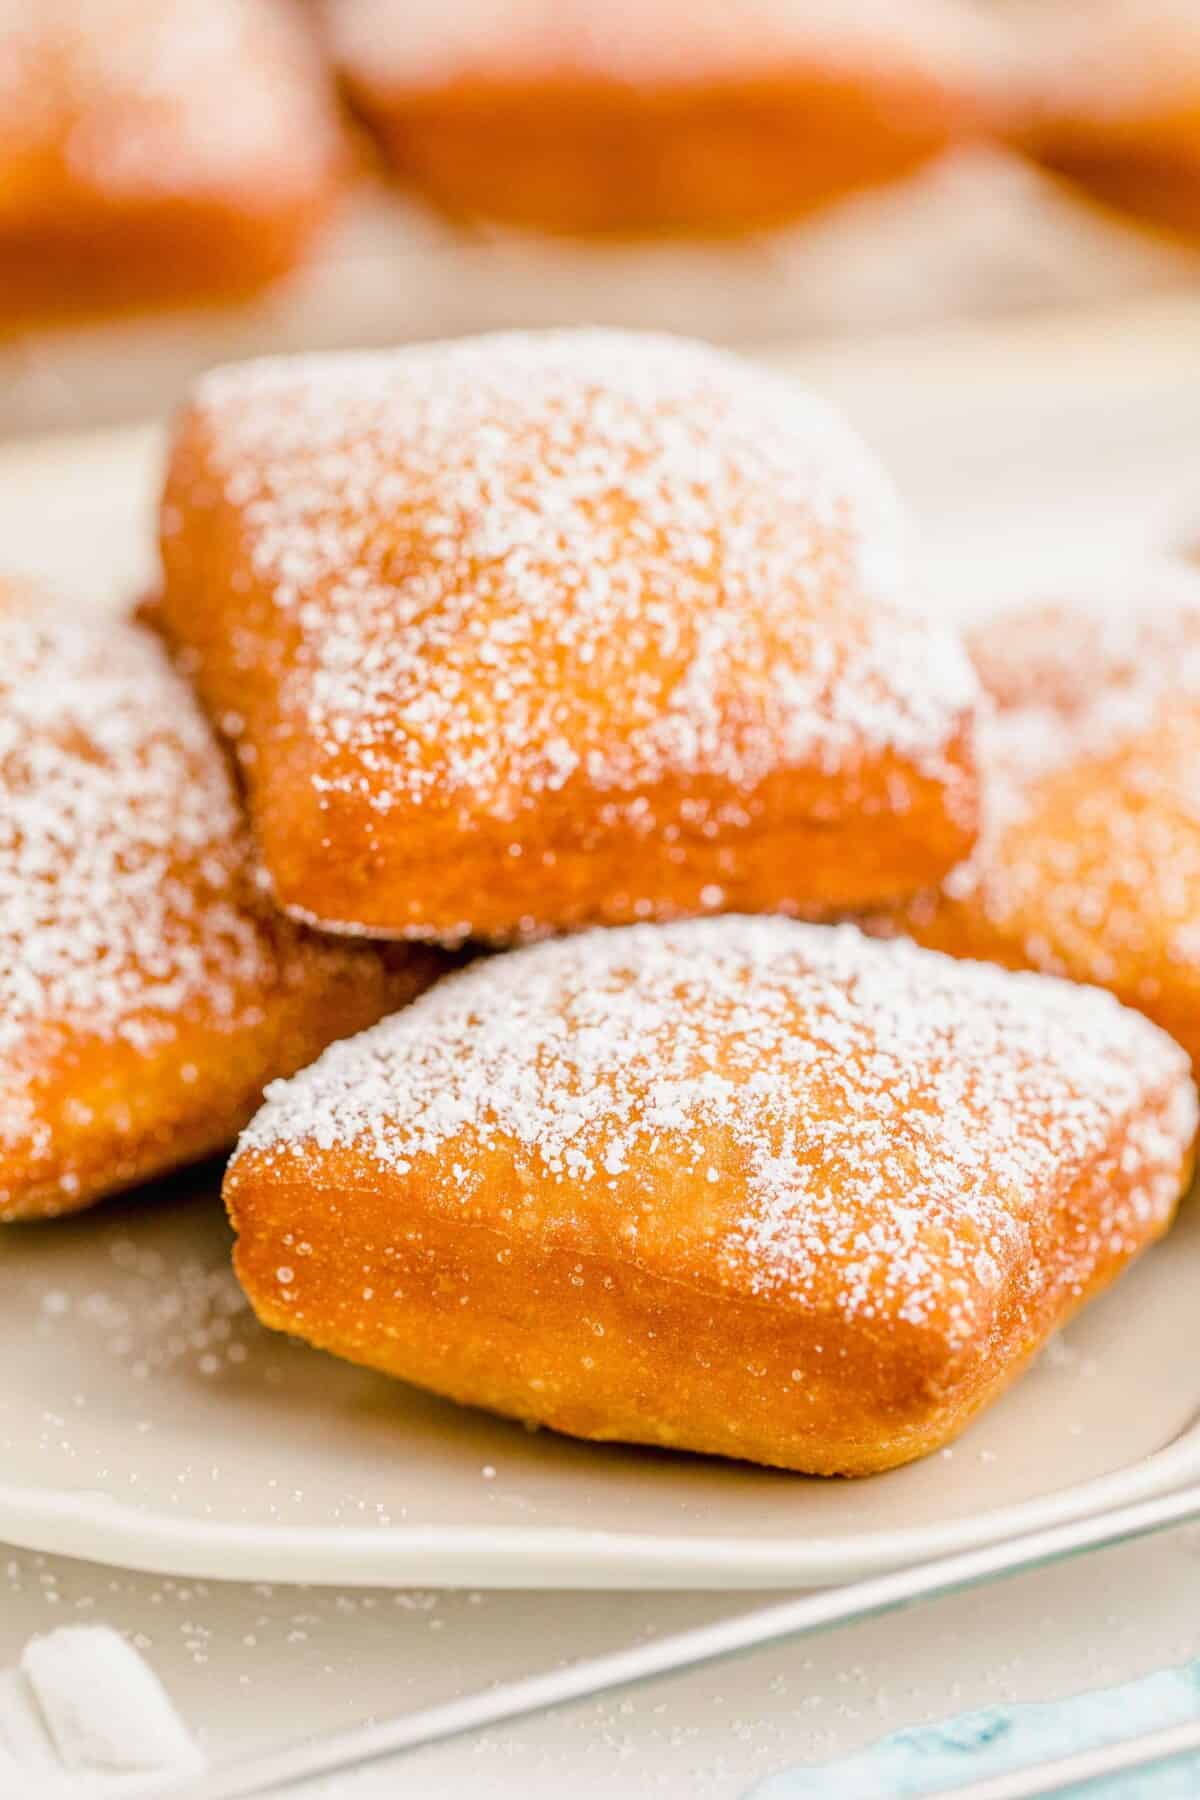 A plate of beignets has been dusted with white powdered sugar.